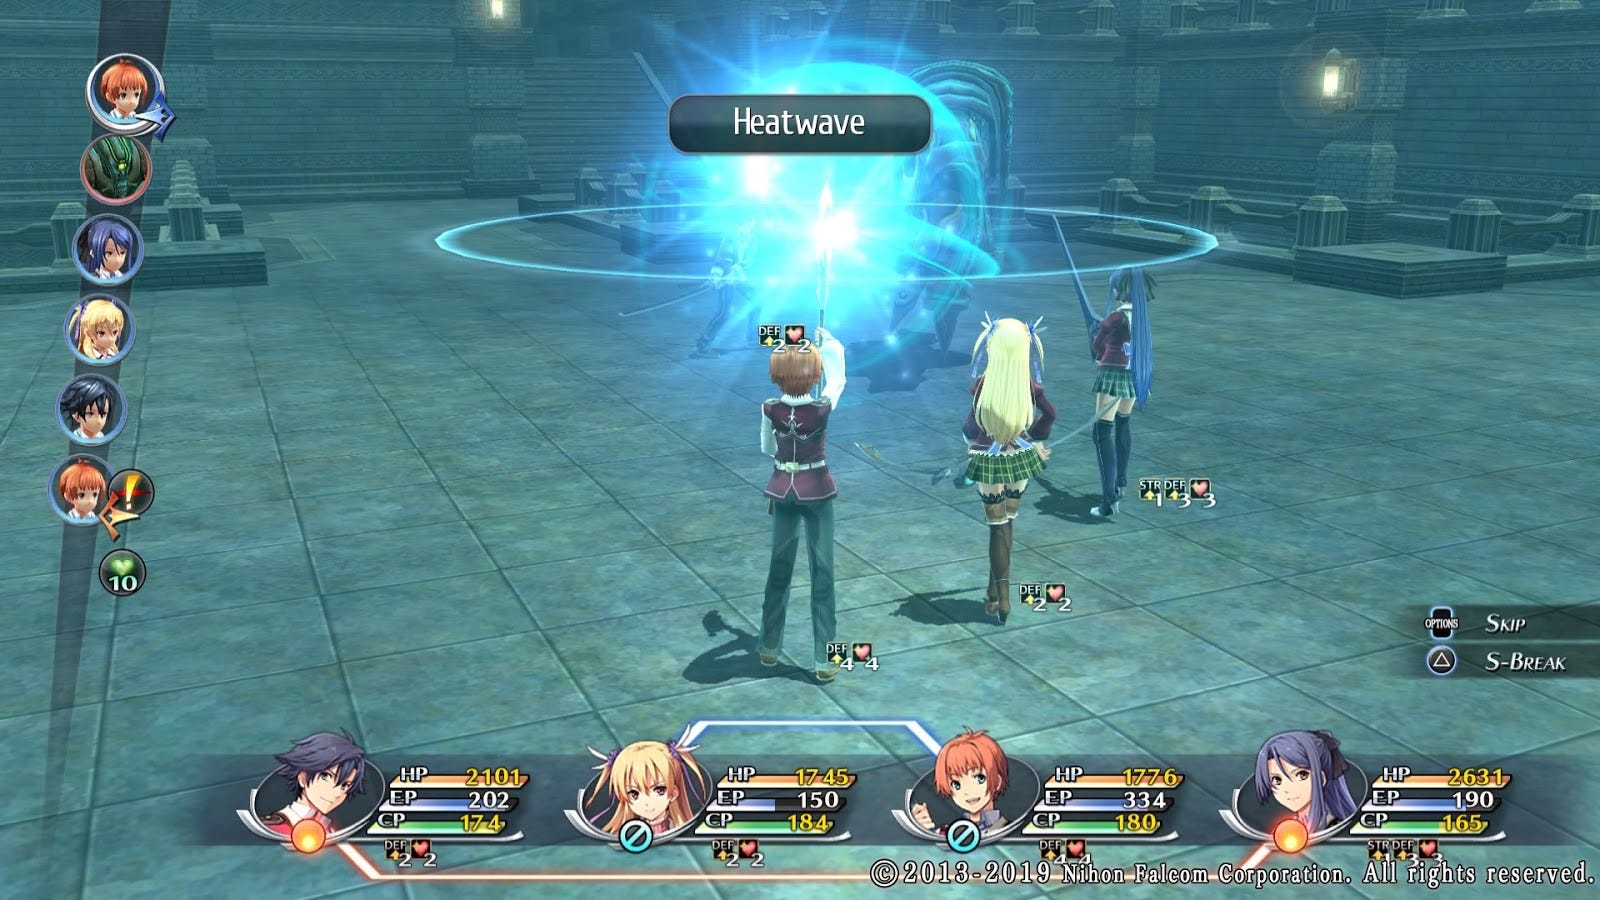 The Legend of Heroes: Trails of Cold Steel III's script is larger